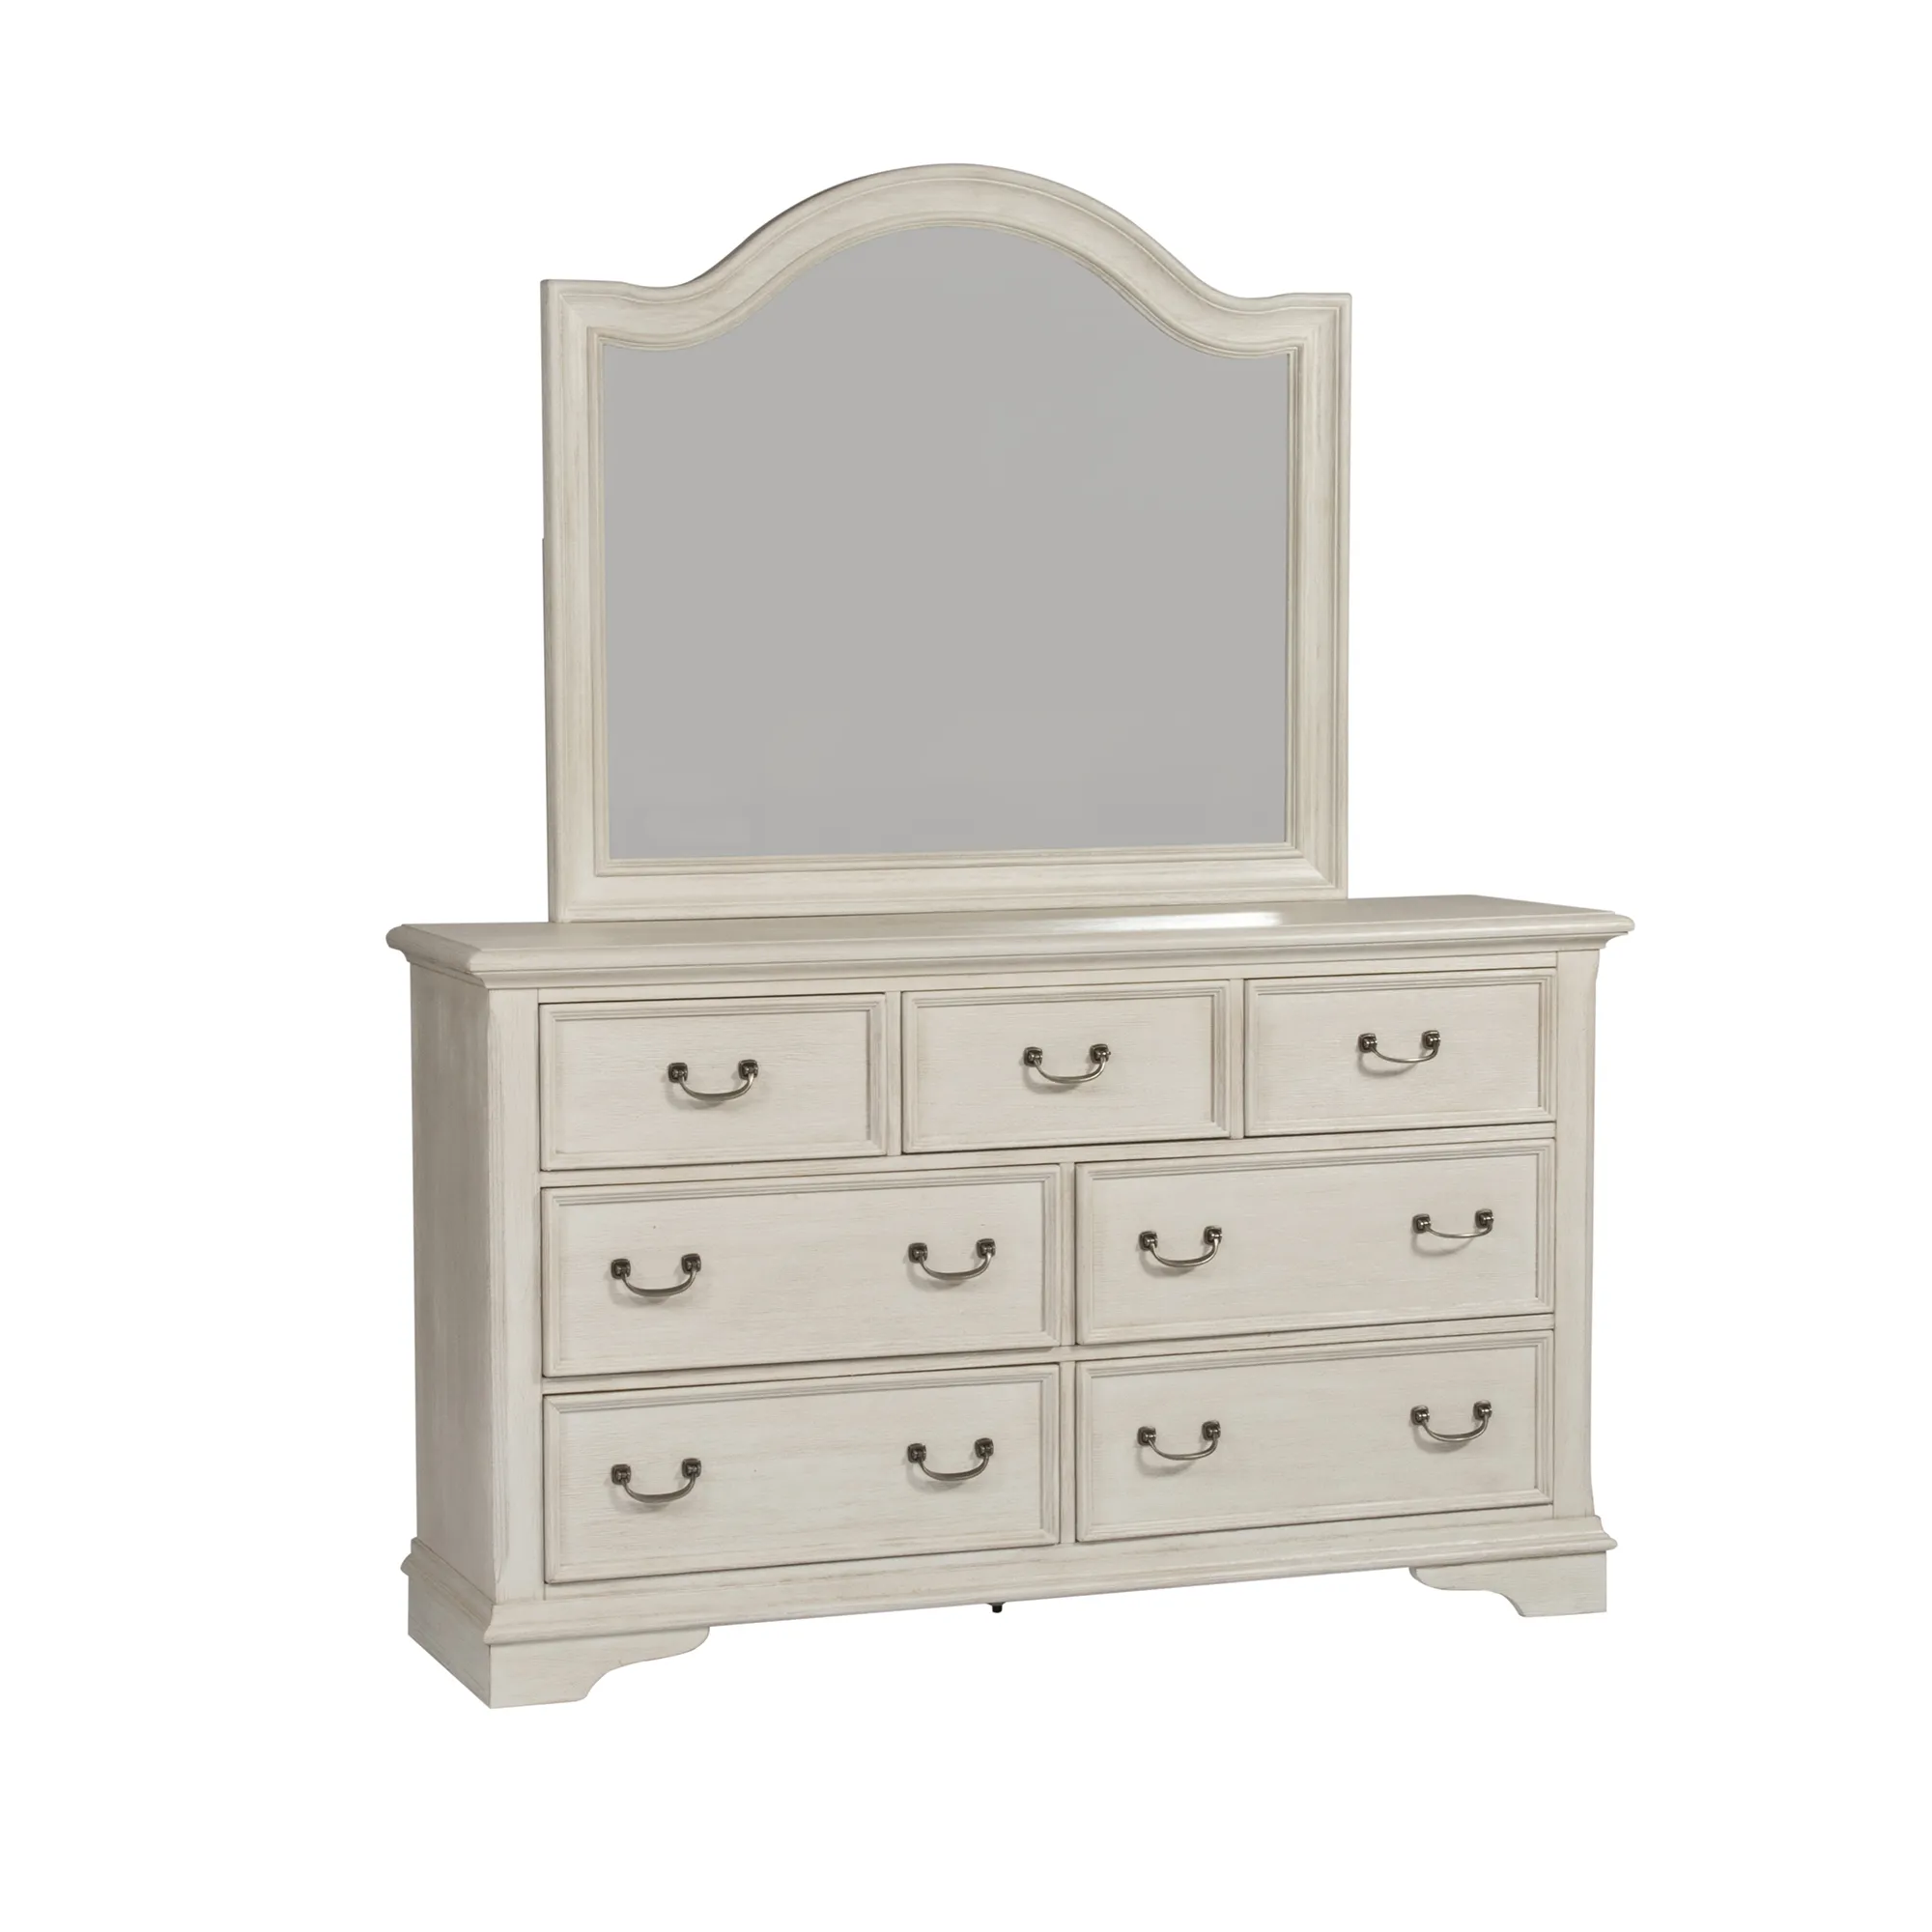 KING PANEL BED DRESSER & MIRROR NIGHT STAND - BAYSIDE